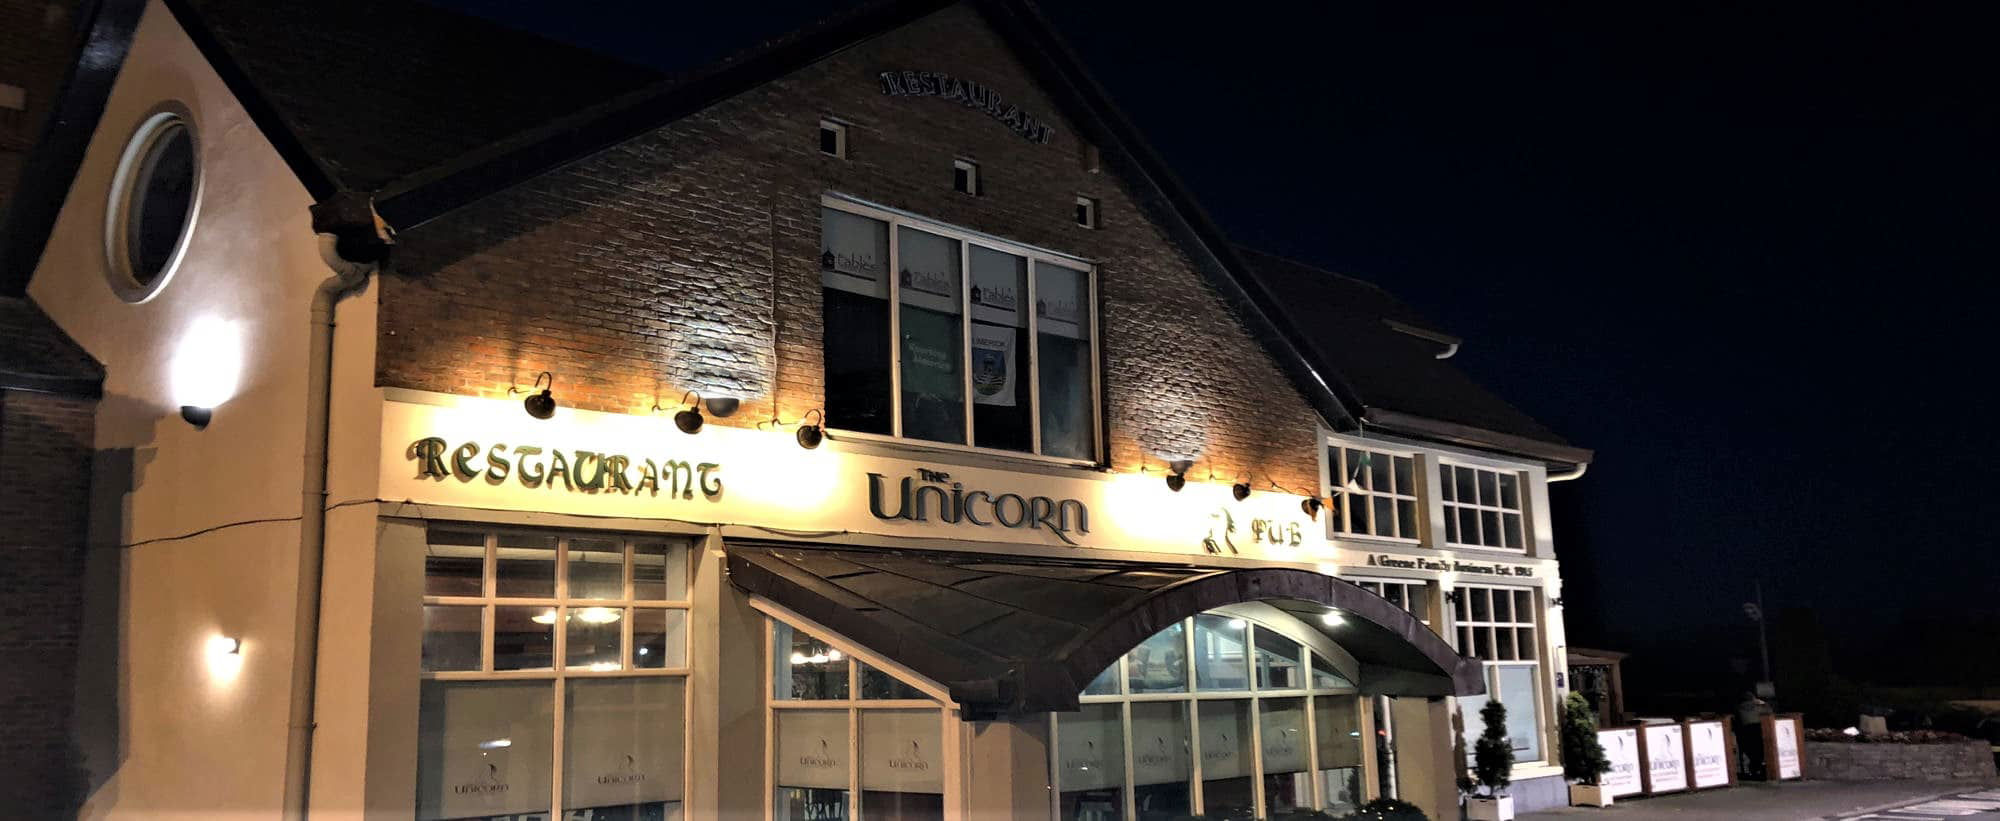 The Unicorn Bar and Restaurant front